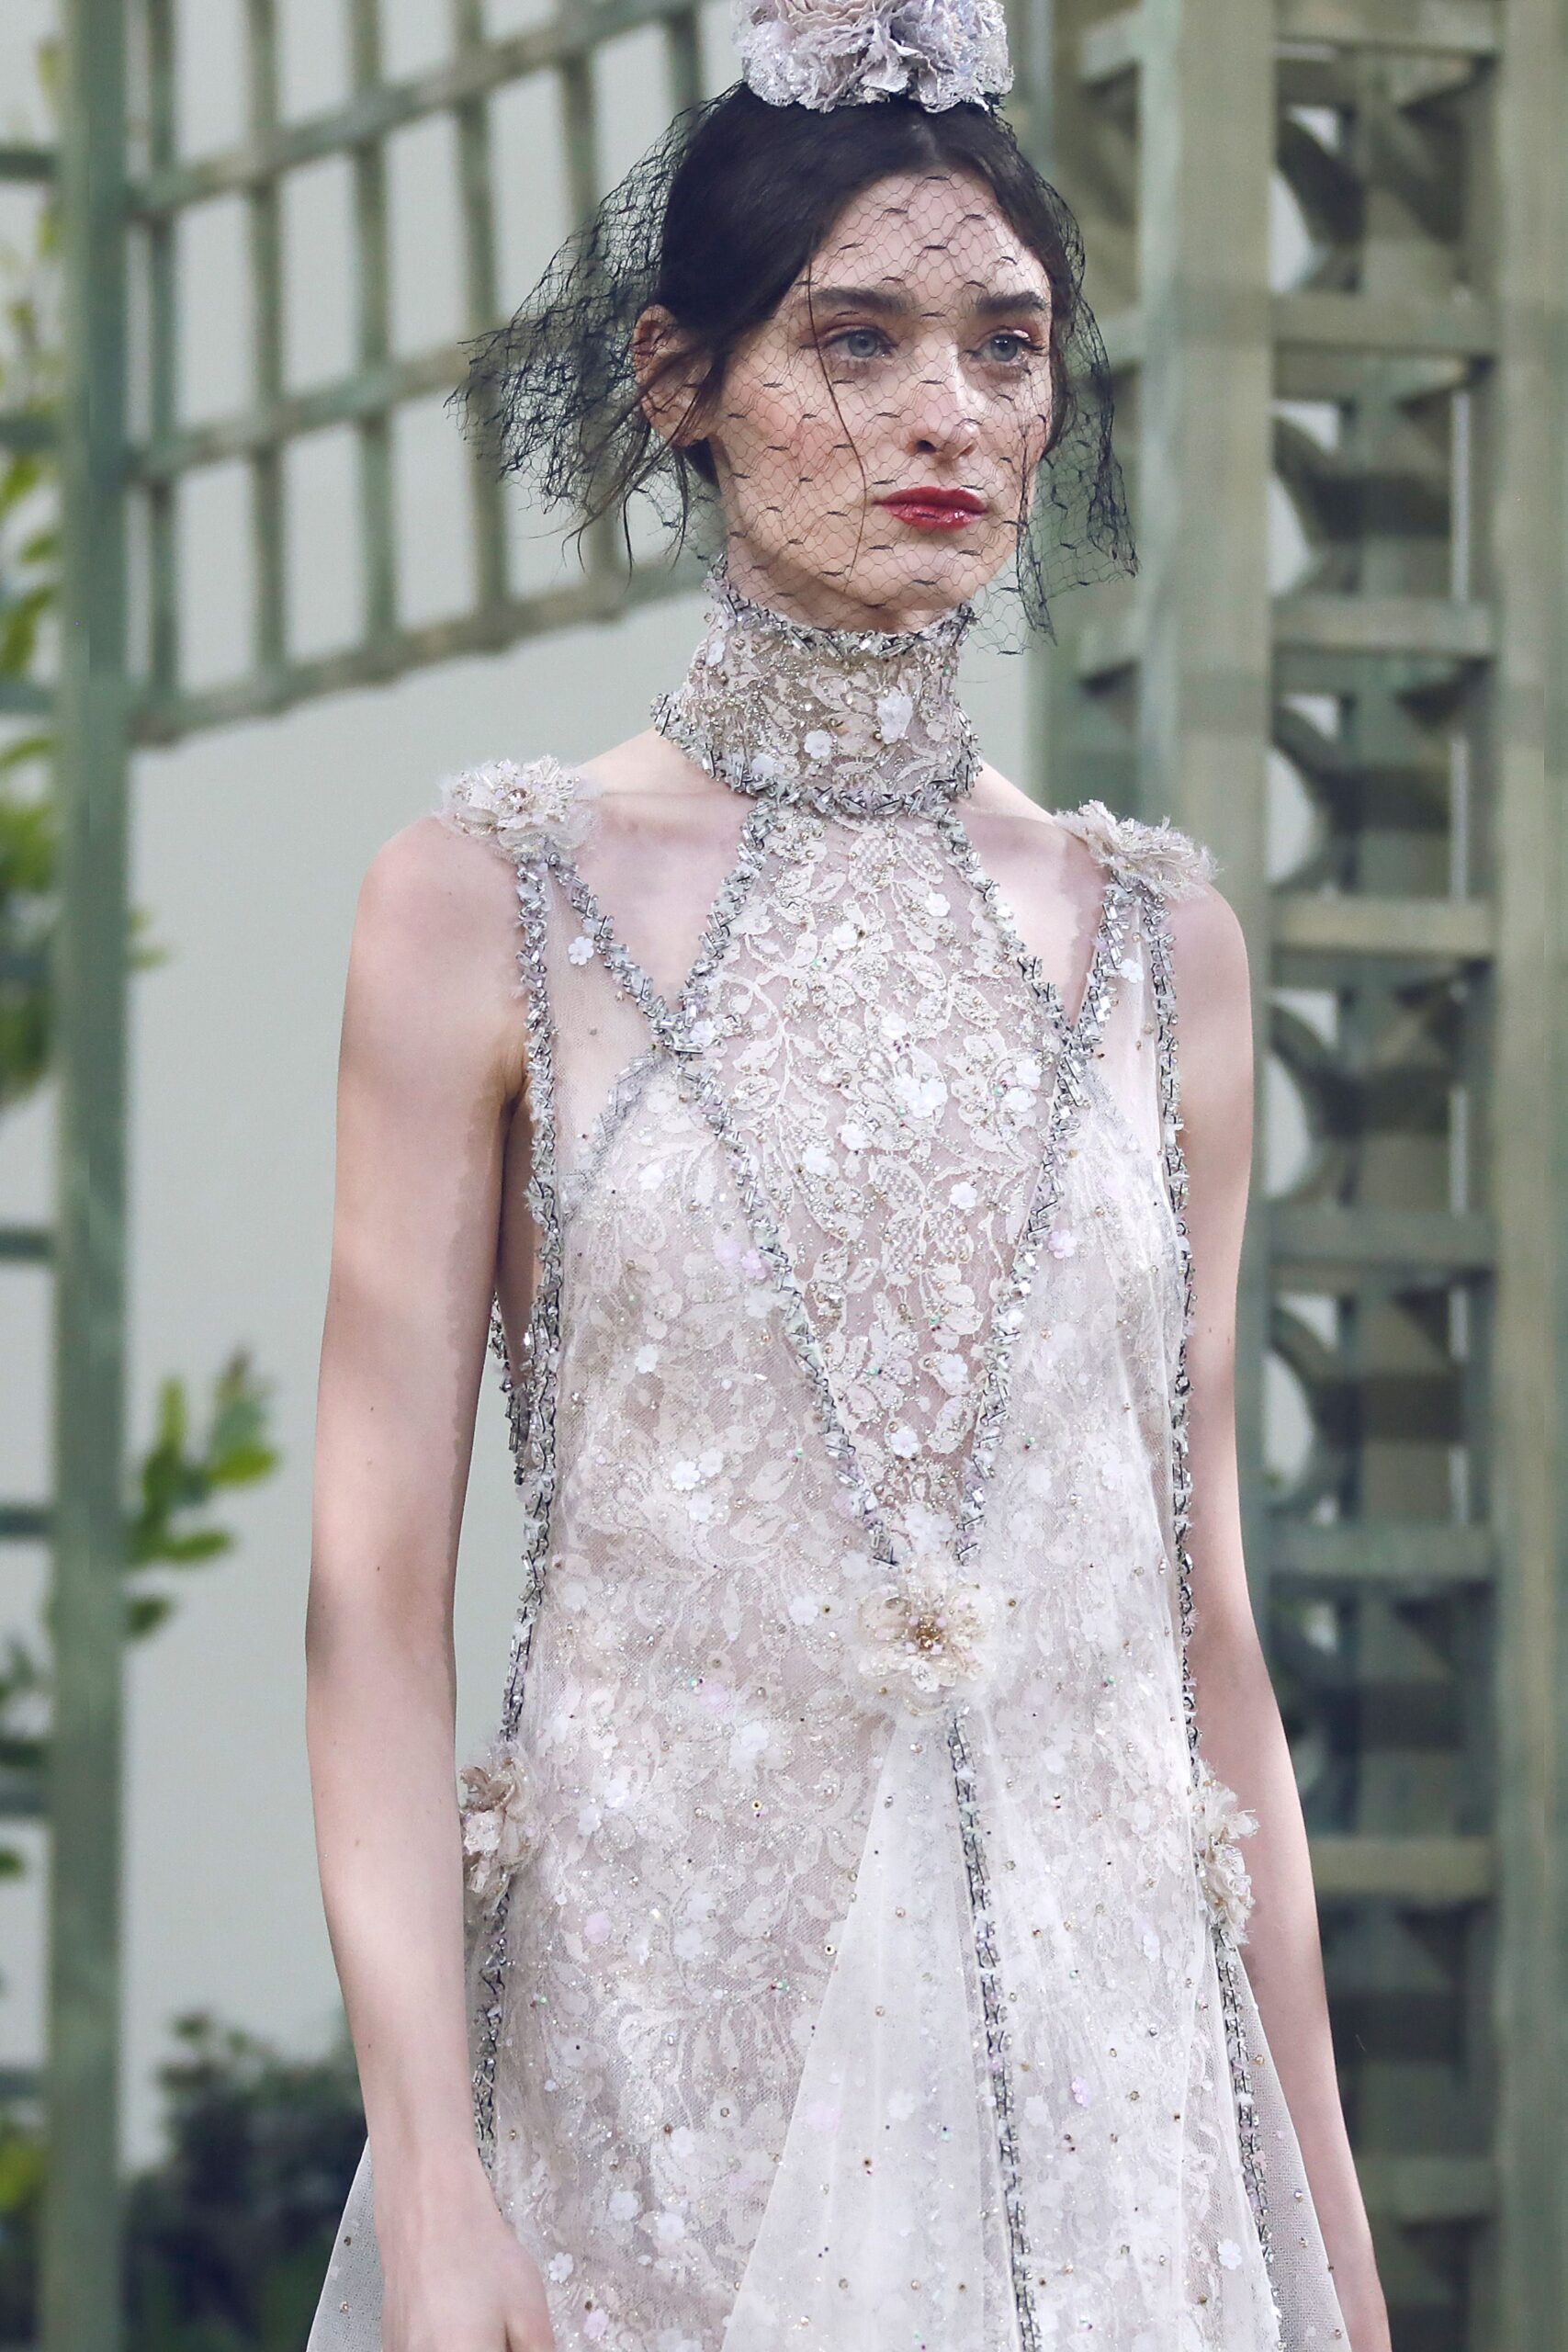 Chanel Brought The Romance To Paris Fashion Week